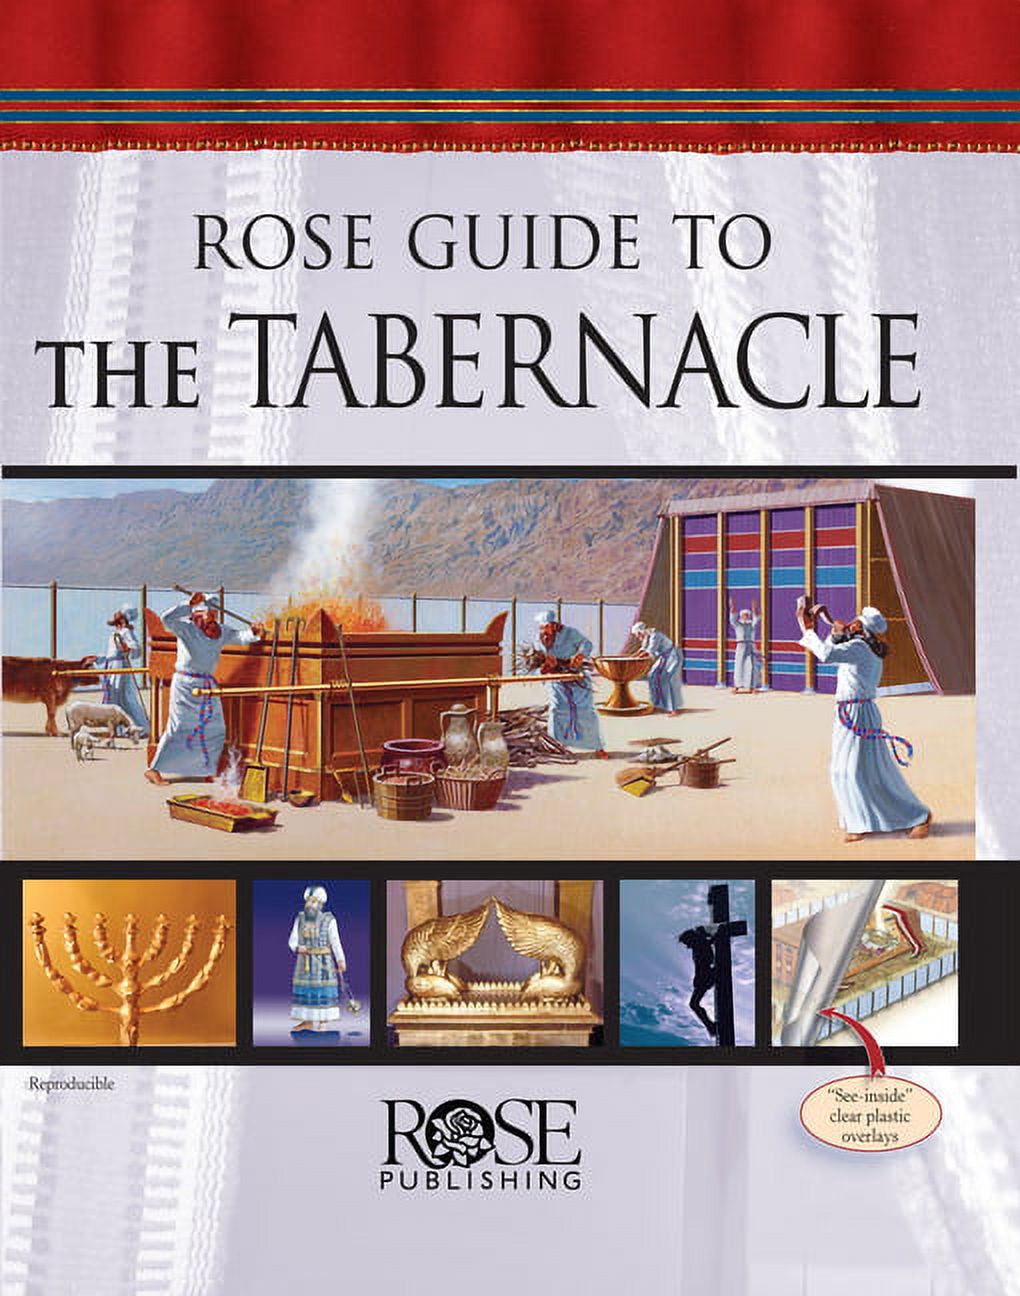 Rose Guide to the Tabernacle (Hardcover) - image 1 of 4